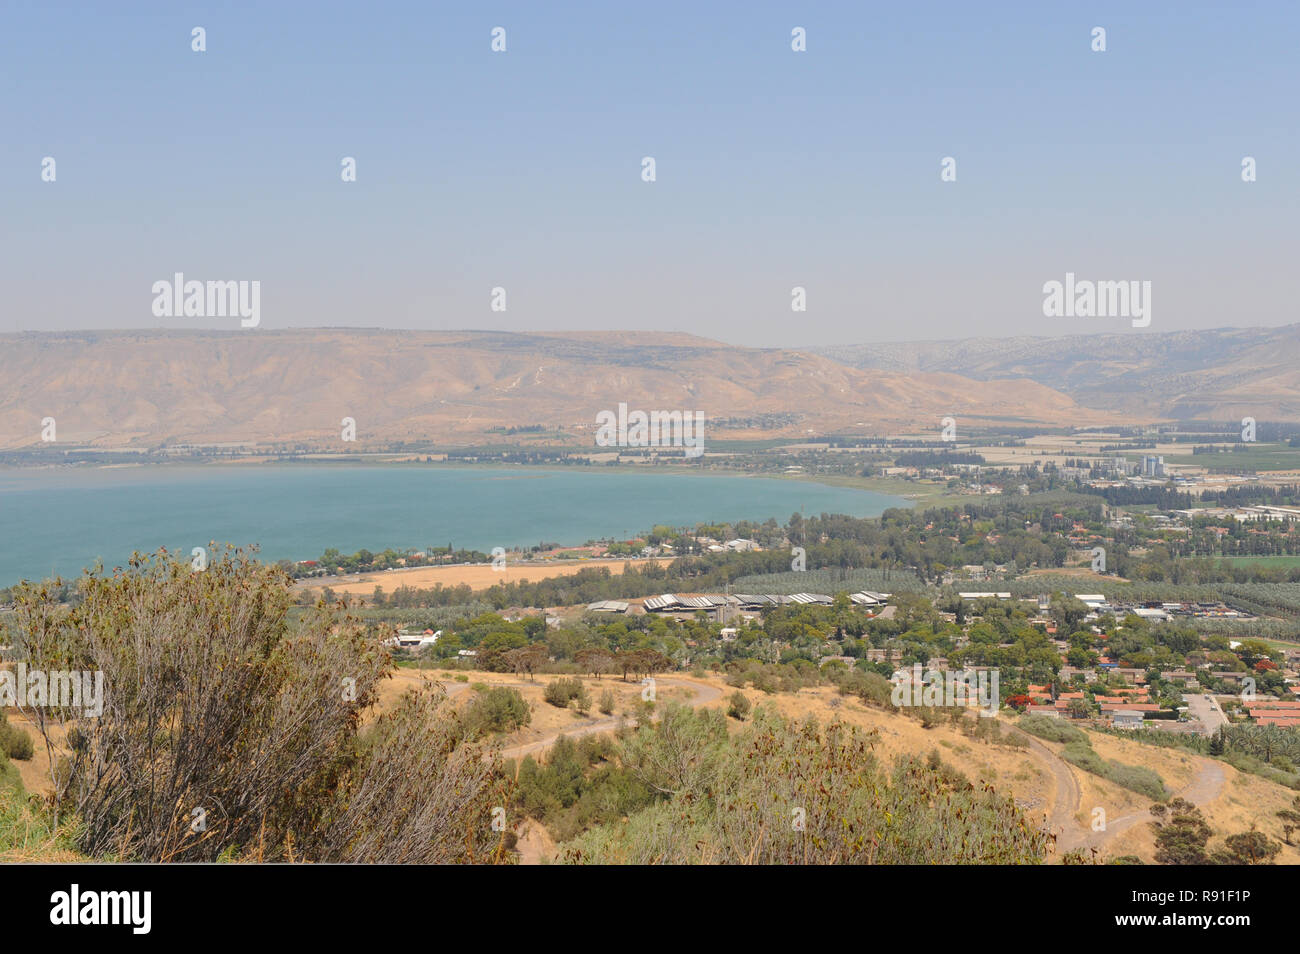 Historical lowest freshwater Biblical lake Kinneret Sea of Galilee of Israel feeding water to surrounding areas making land fertile for agriculture. Stock Photo